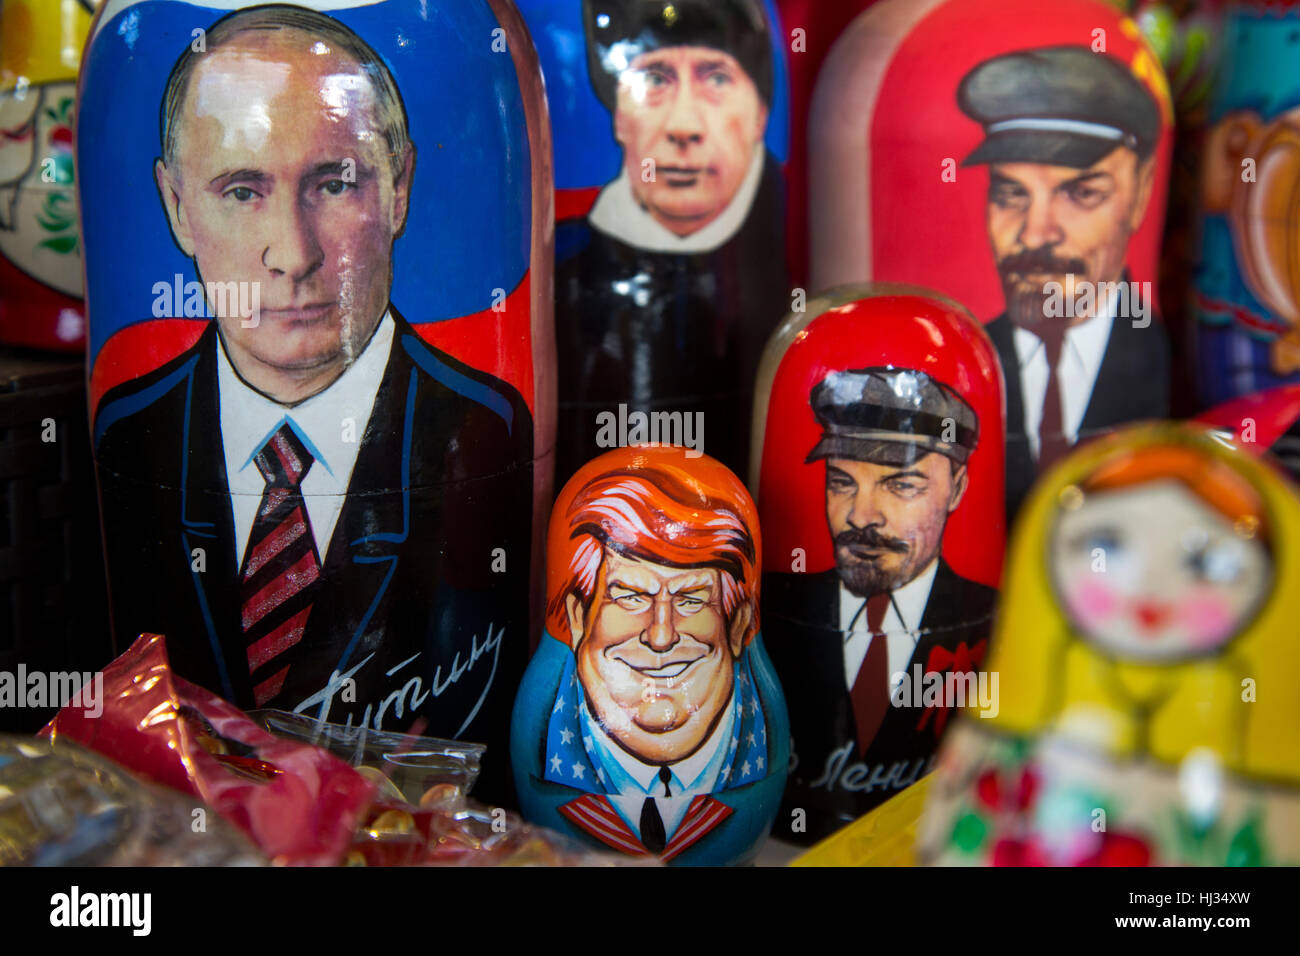 Russian traditional toys - Matryoshka with a portrait of Donald Trump in souvenir kiosk on the Red square in Moscow, Russia Stock Photo